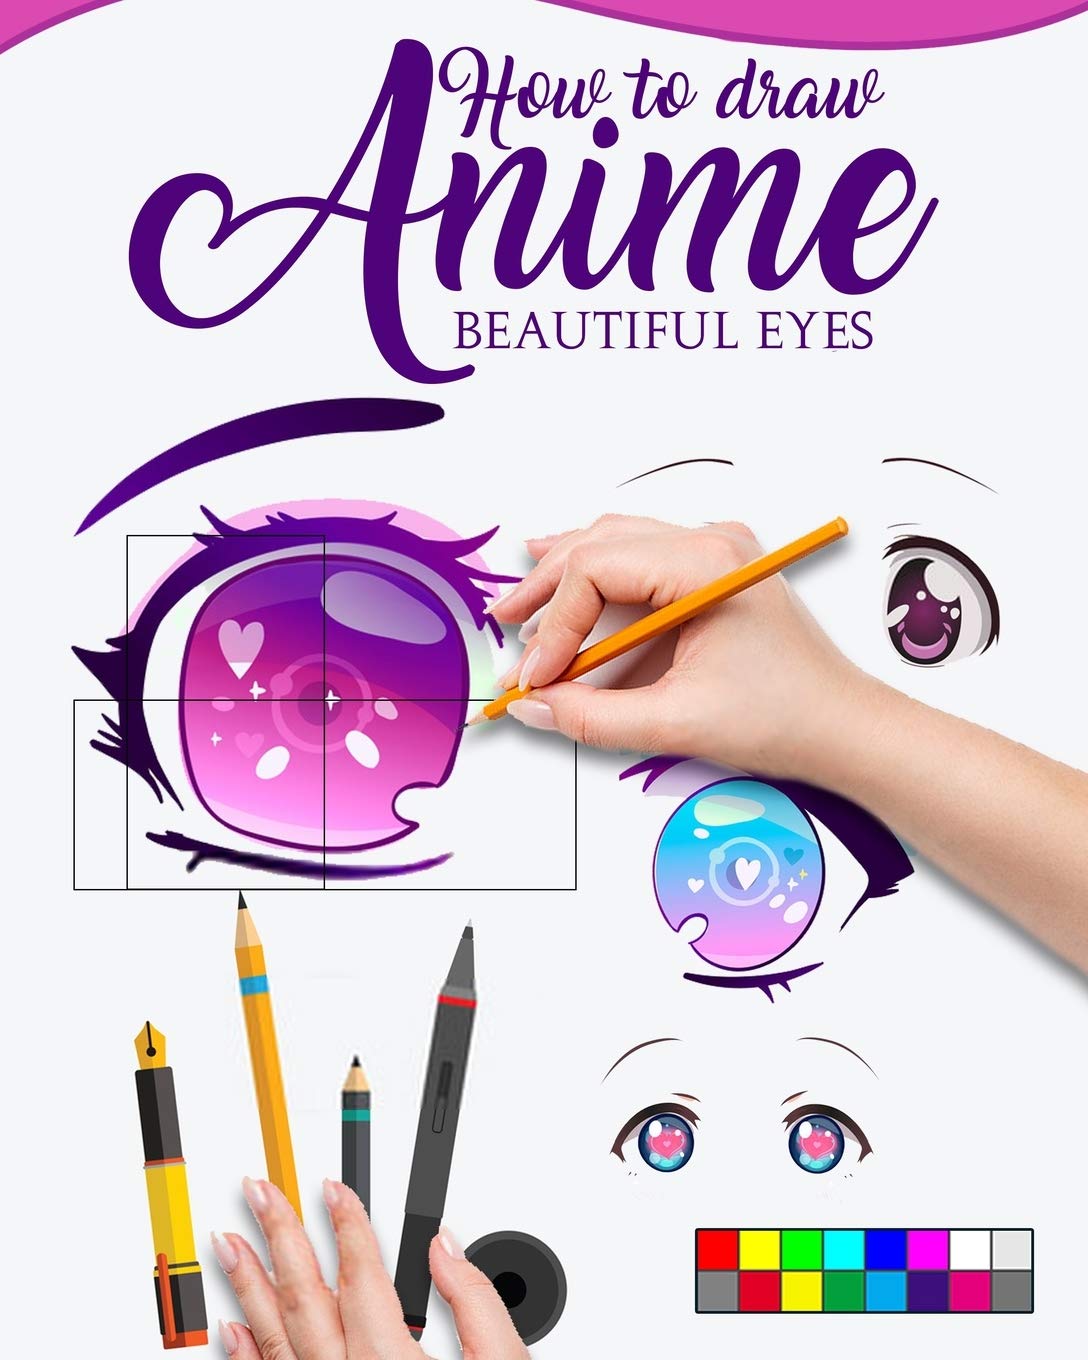 Anime eyes Images - Search Images on Everypixel